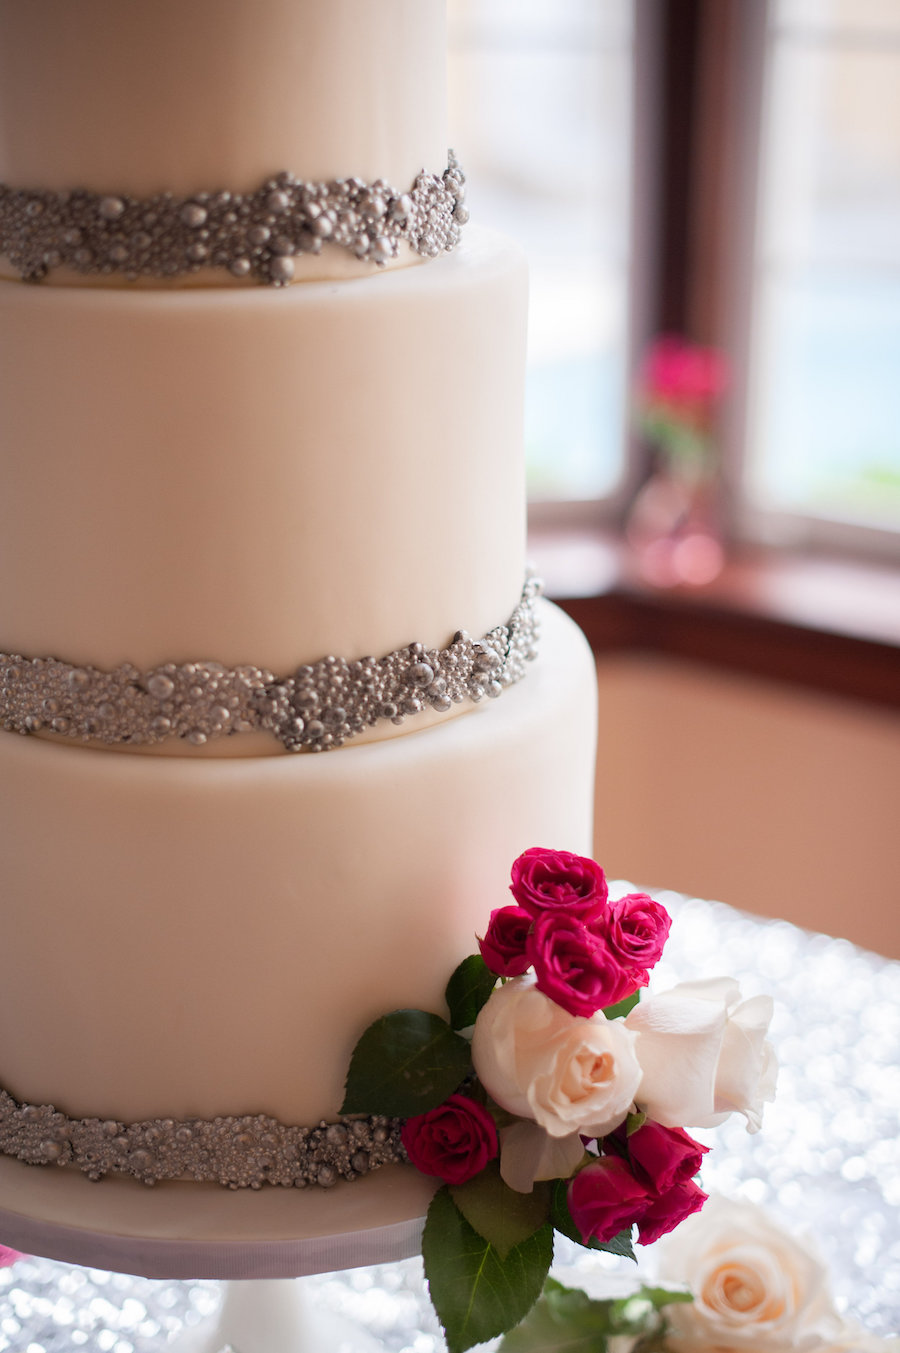 Three Tiered, White, Round Wedding Cake with Silver Accents and Ivory and Pink Flowers